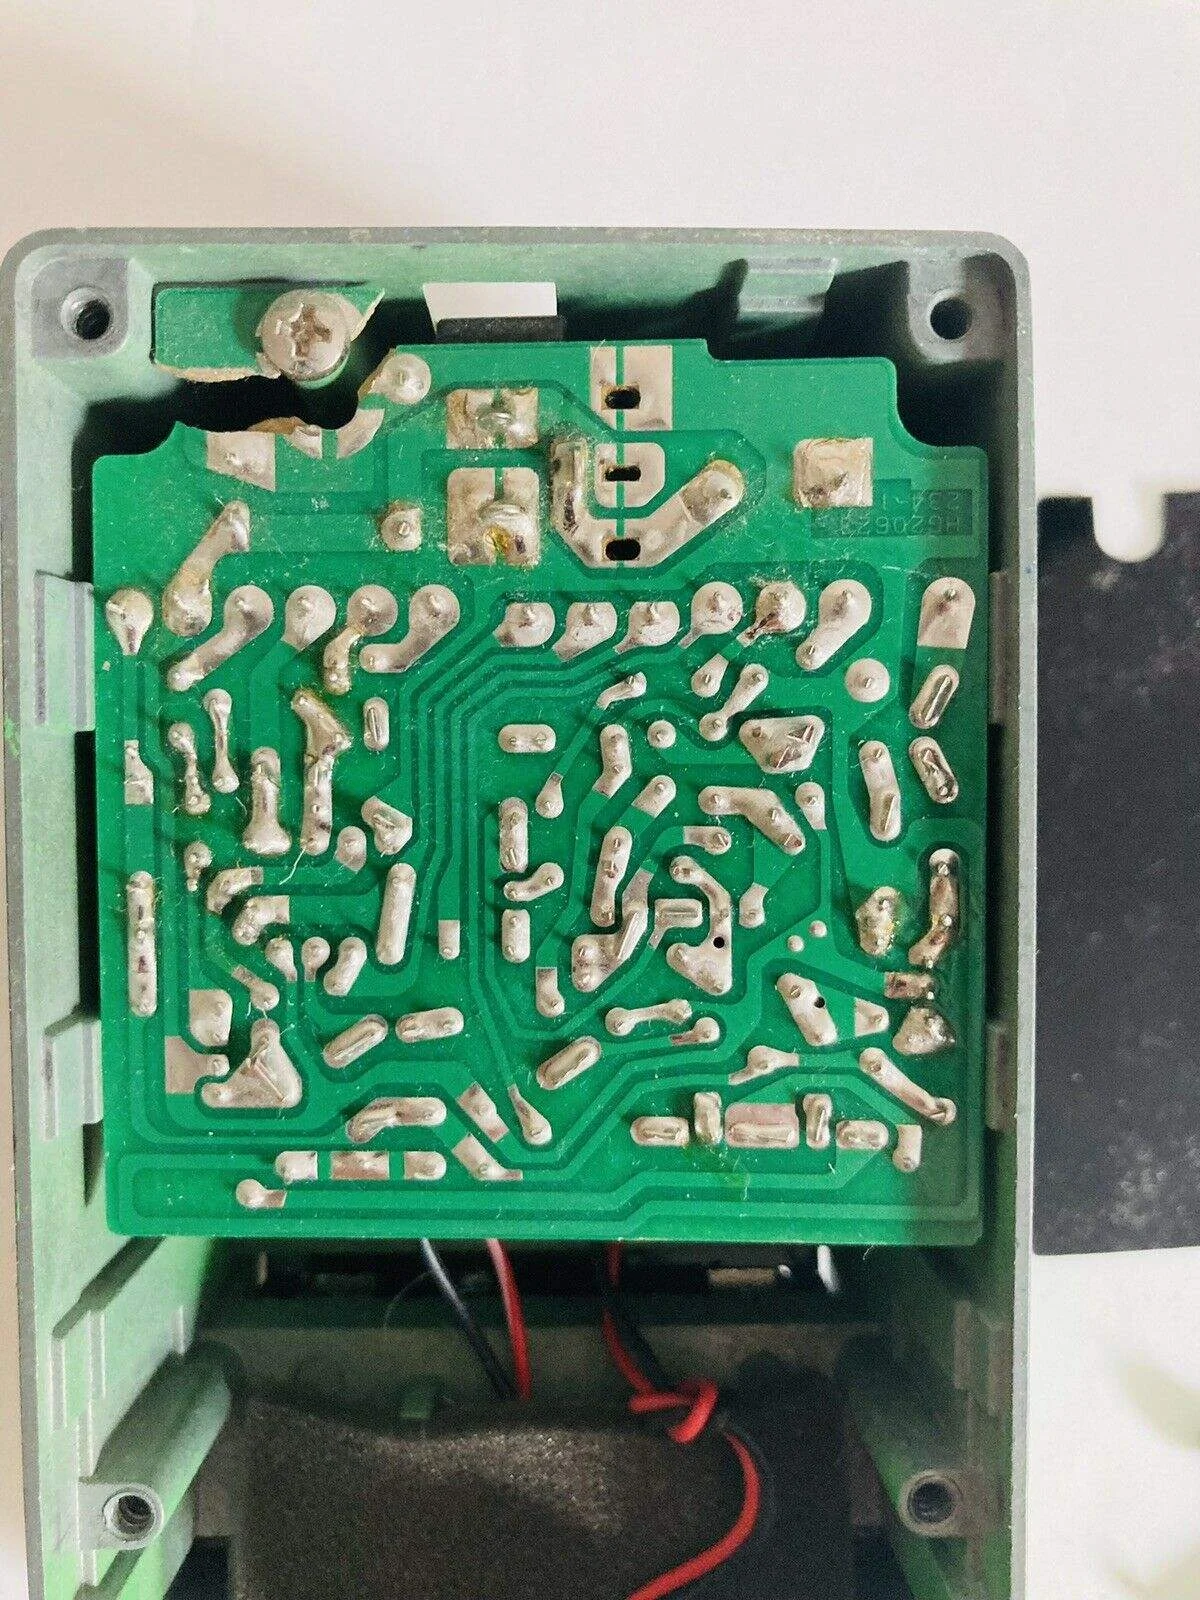 An effects pedal PCB. The corner has been snapped off where it is screwed to the case